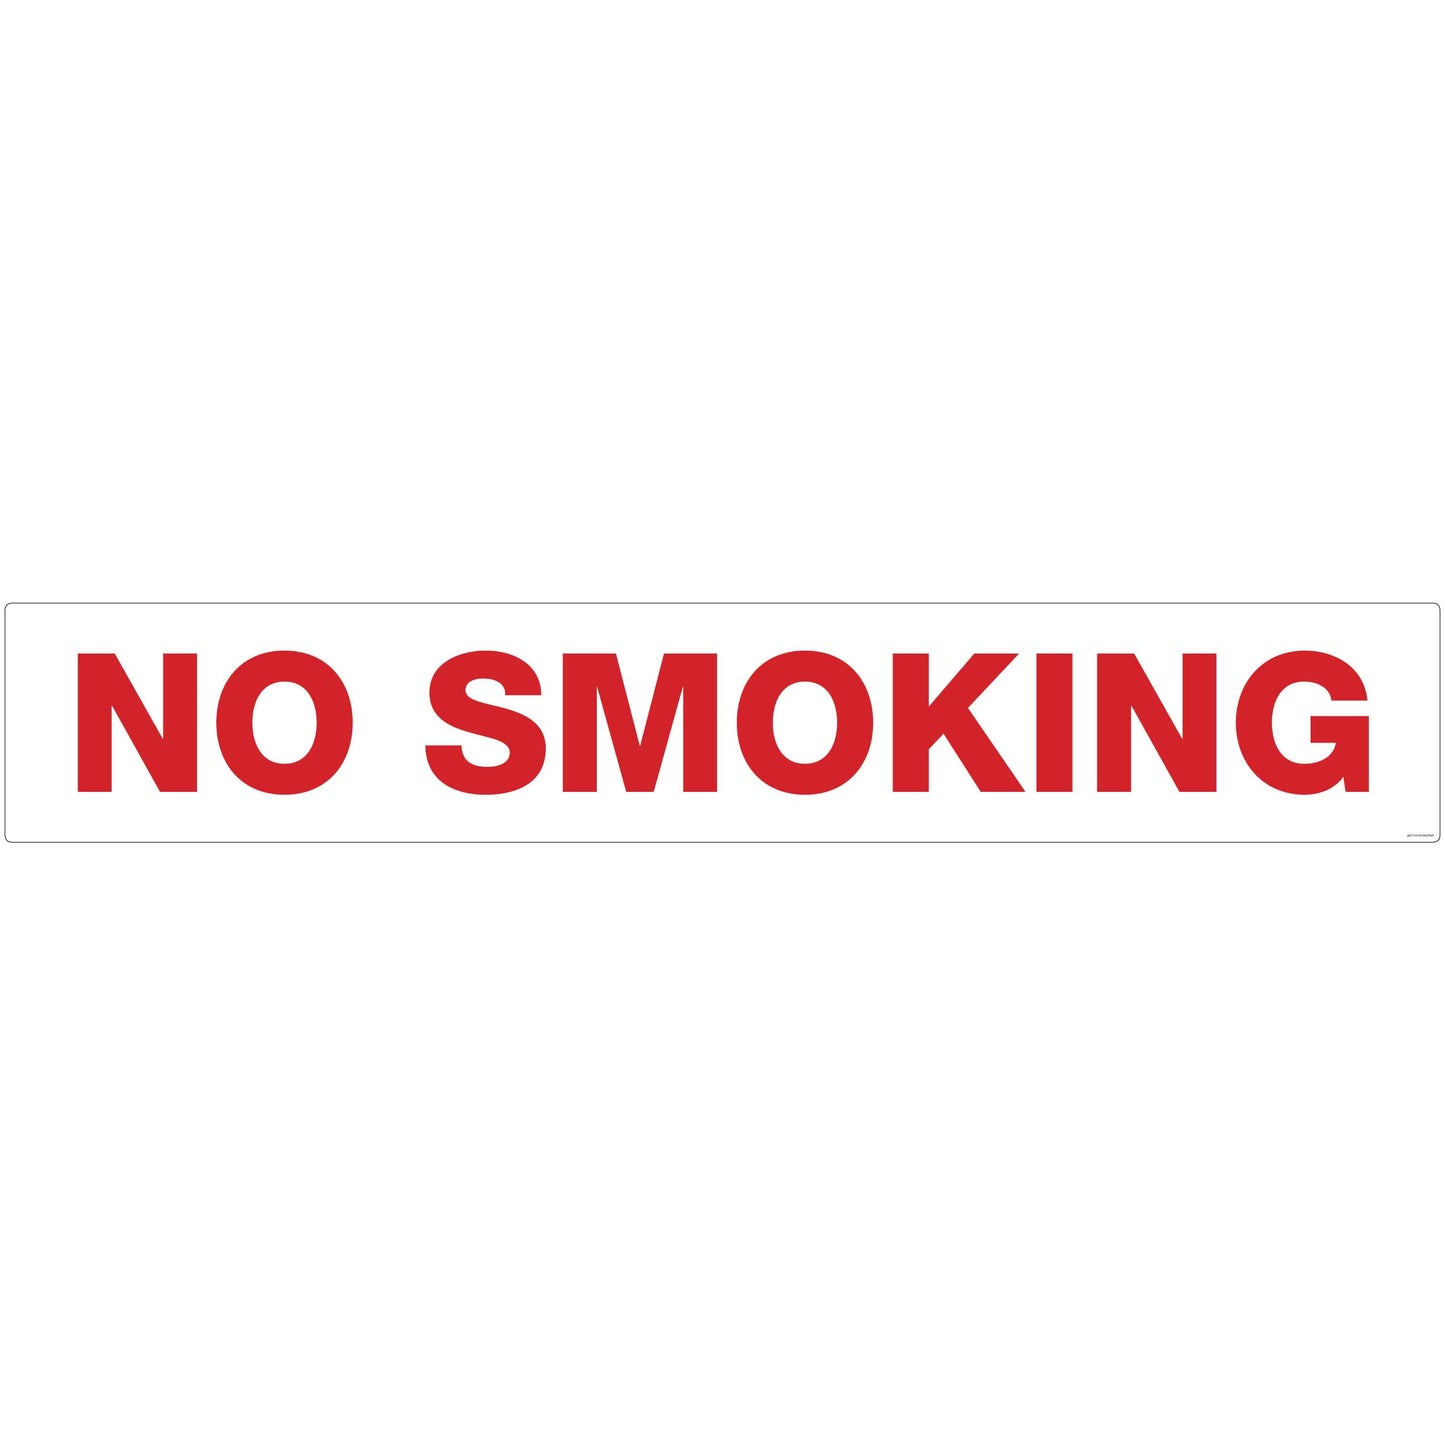 No Smoking Decal. 36 inches by 6 inches in size.